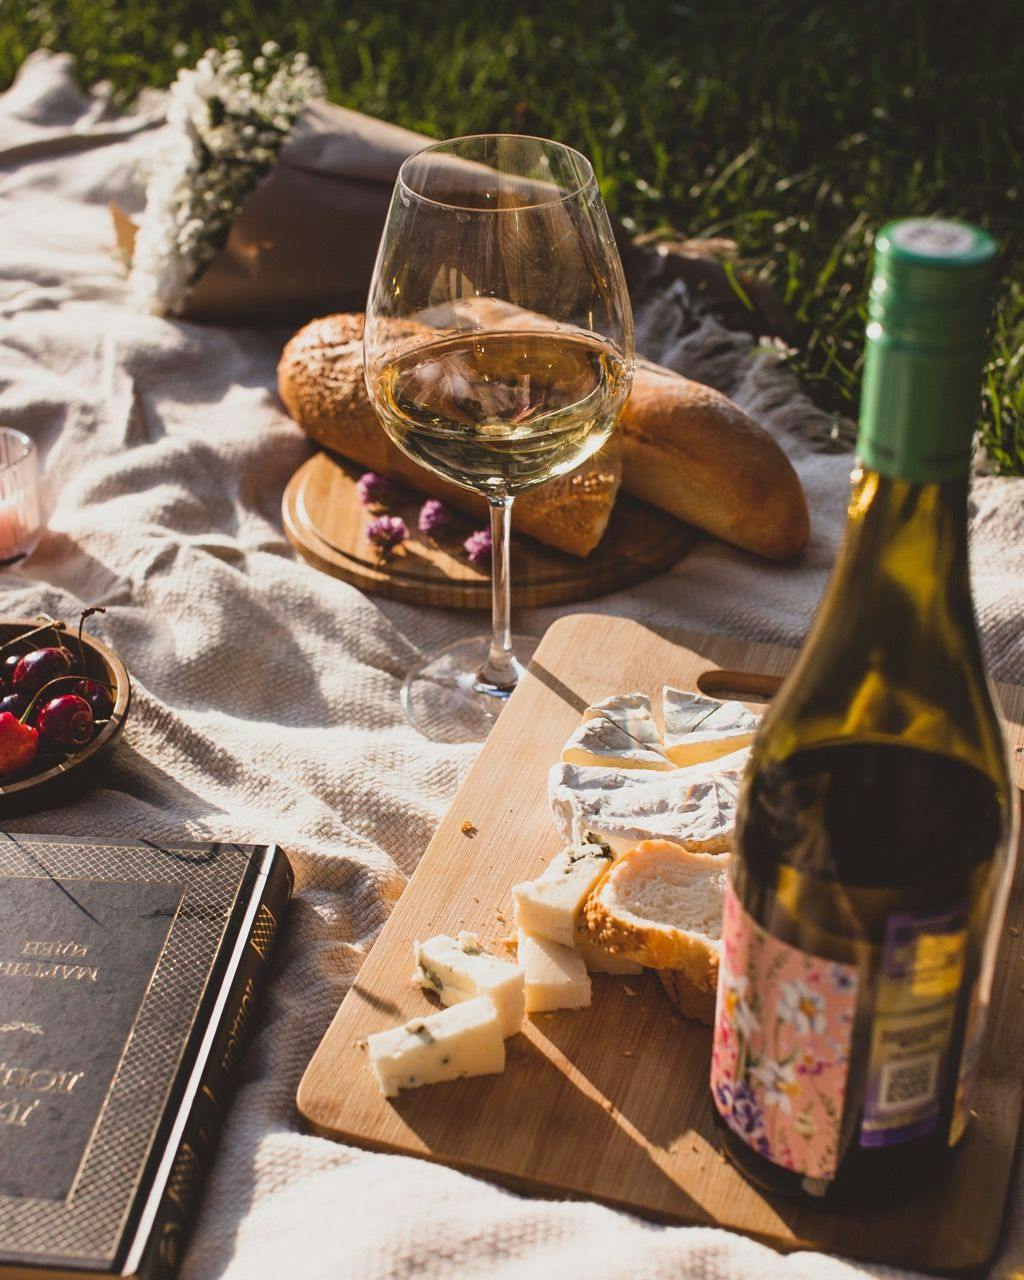 Picnic with cheese and wine in France